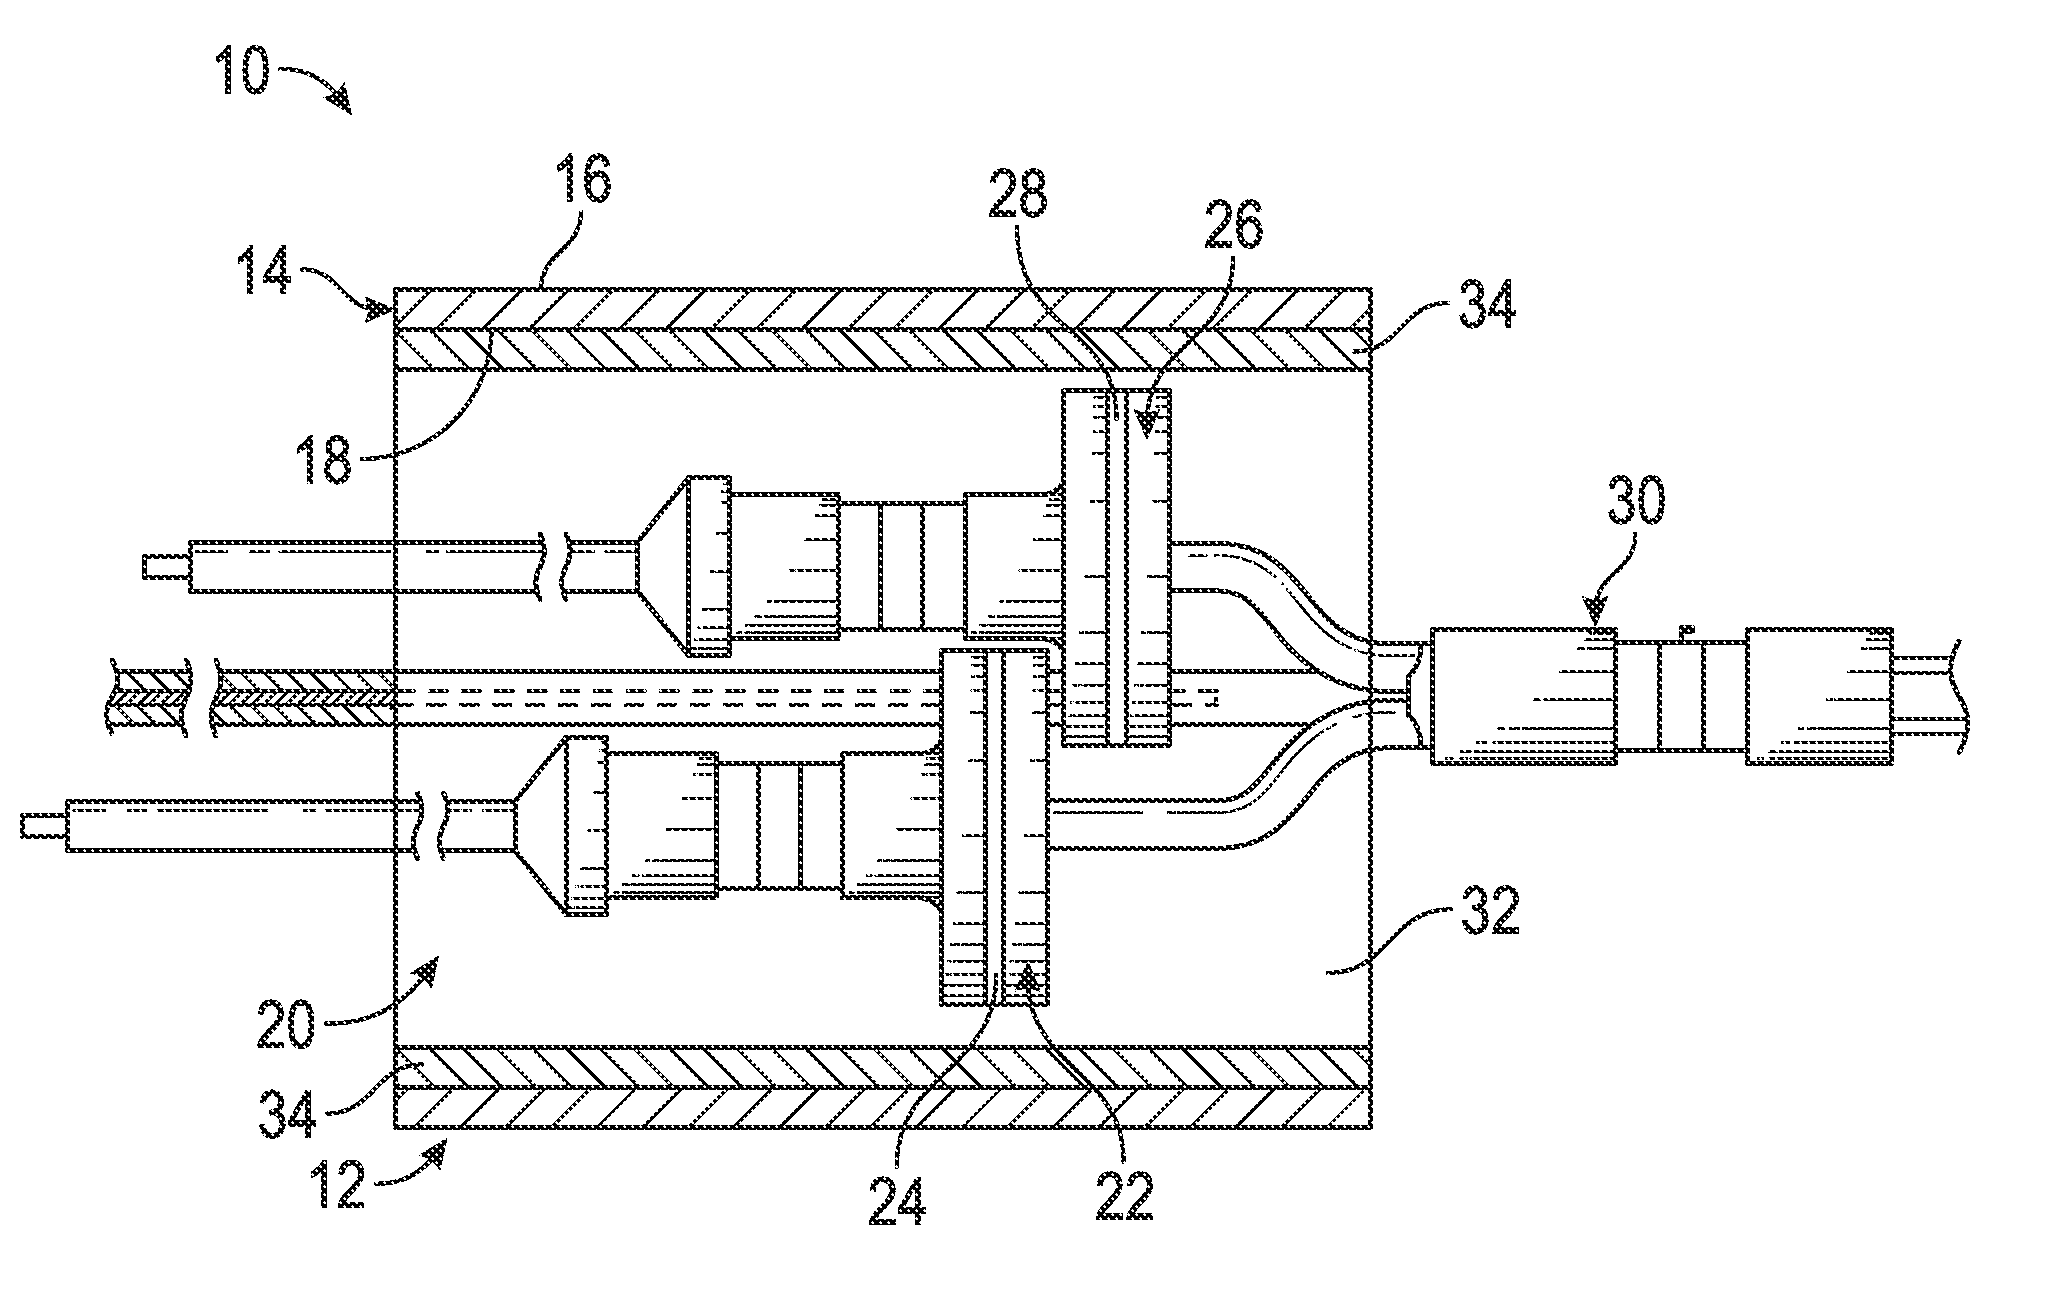 Pneumatic pressure detector for a fire alarm system and method of insulating